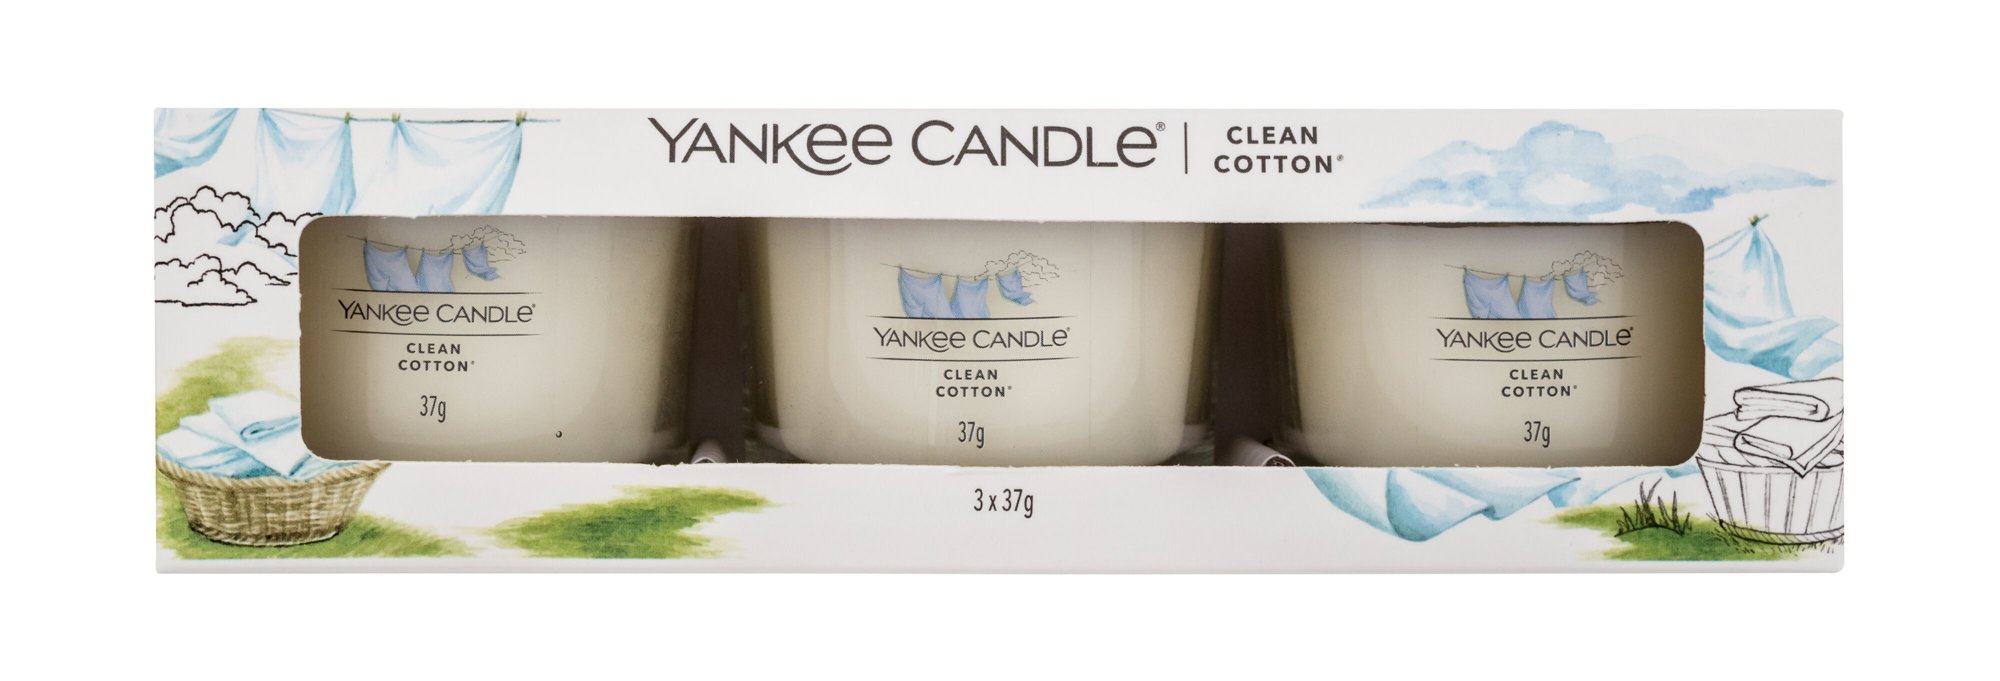 Yankee Candle Clean Cotton 37g Scented Candle 3 x 37 g Kvepalai Unisex Scented Candle Rinkinys